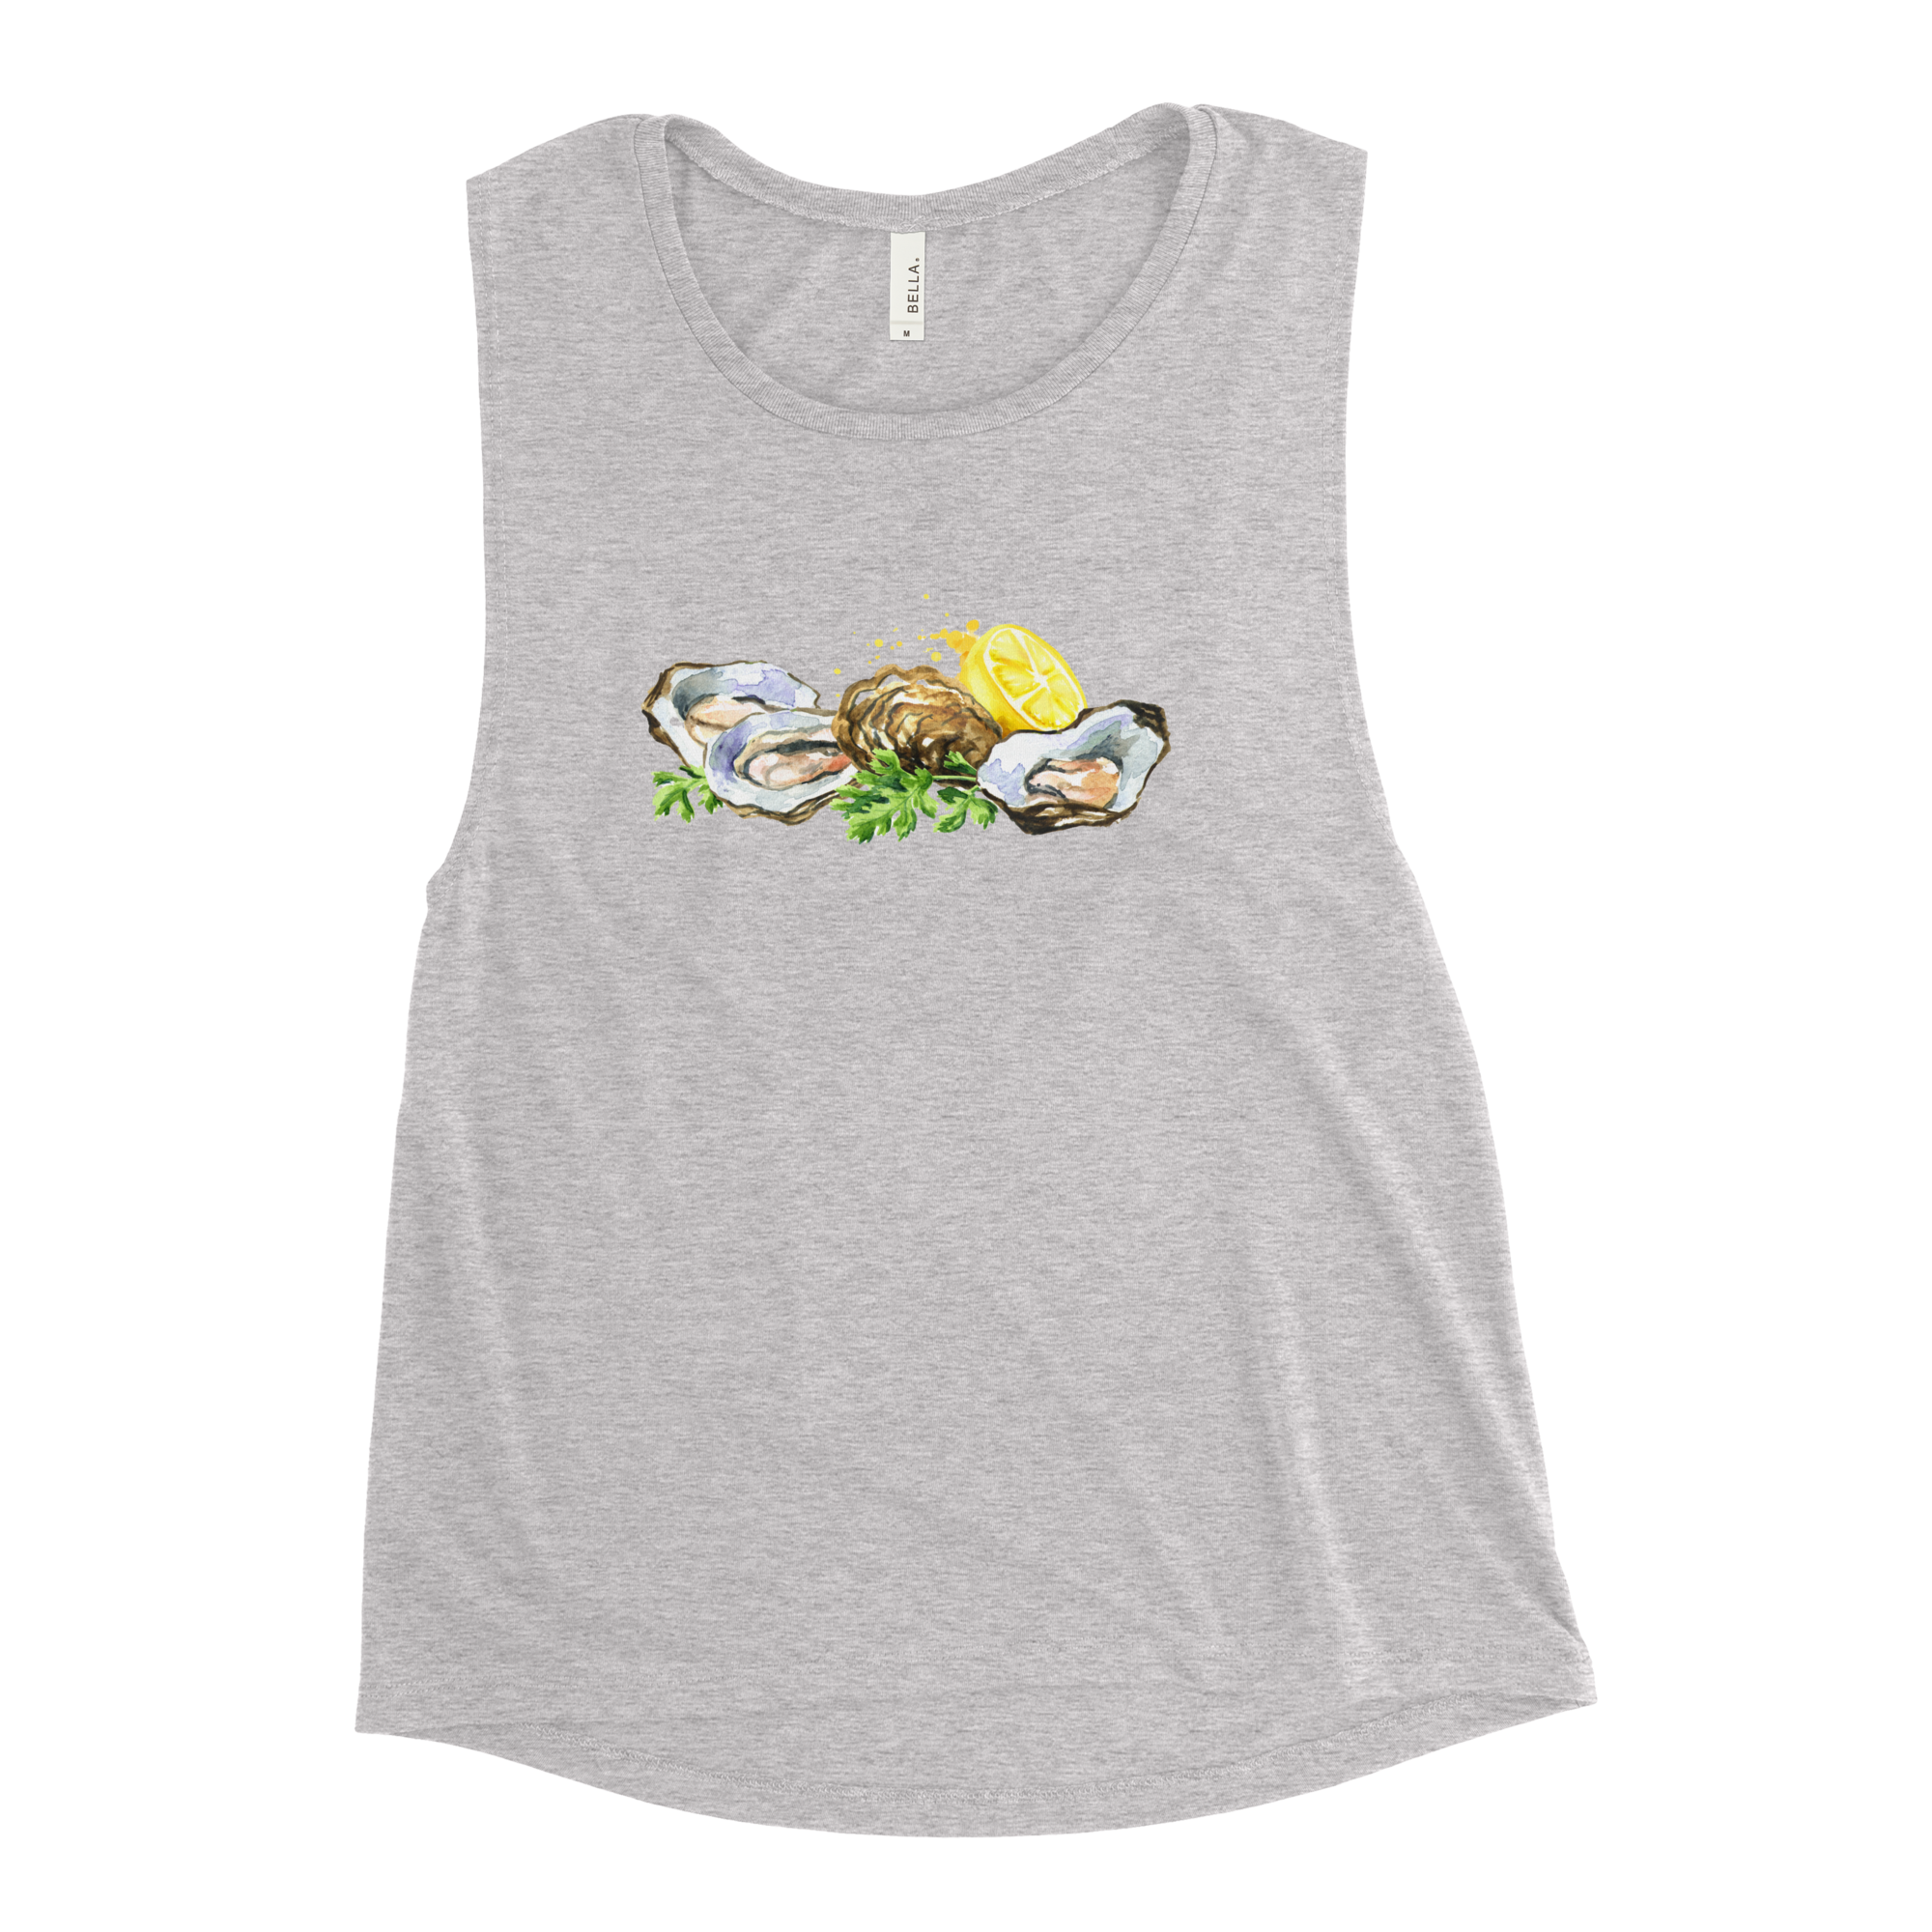 womens-muscle-tank-athletic-heather-front-667b05c433a24.png